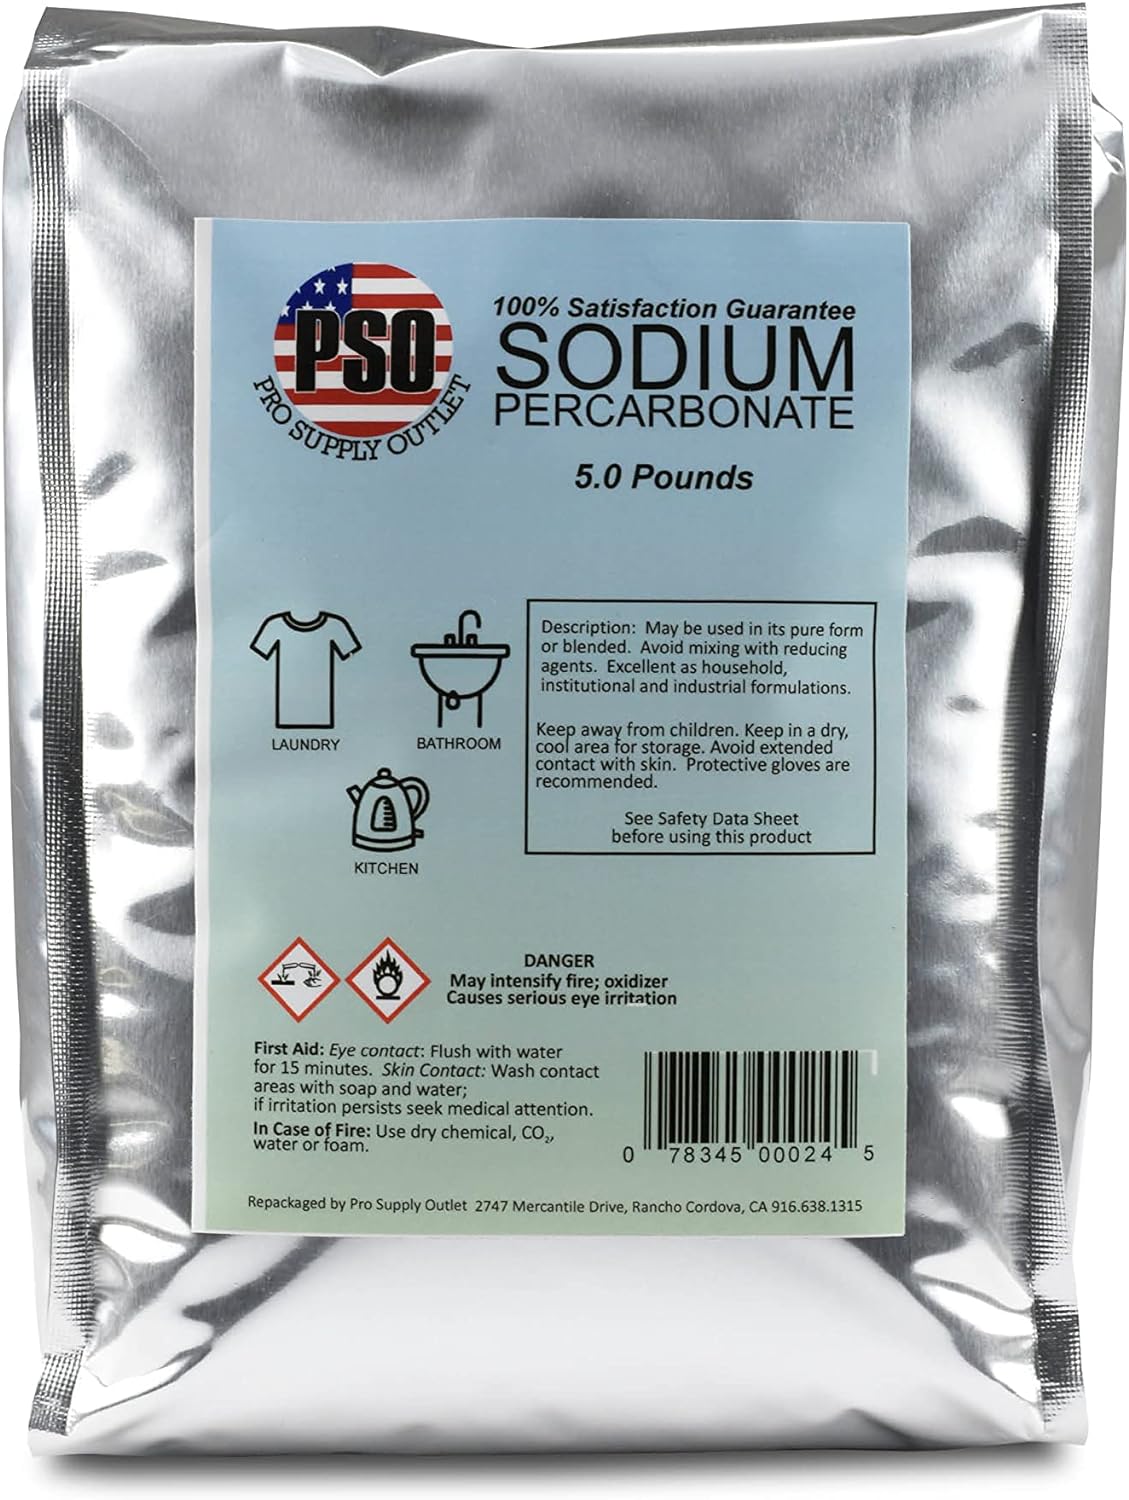 SupplyMasters Sodium Percarbonate Powder 5 lbs Pack - Oxygen Source & Bleach Alternative - Clothes Brightener, Laundry Detergent & Stain Remover